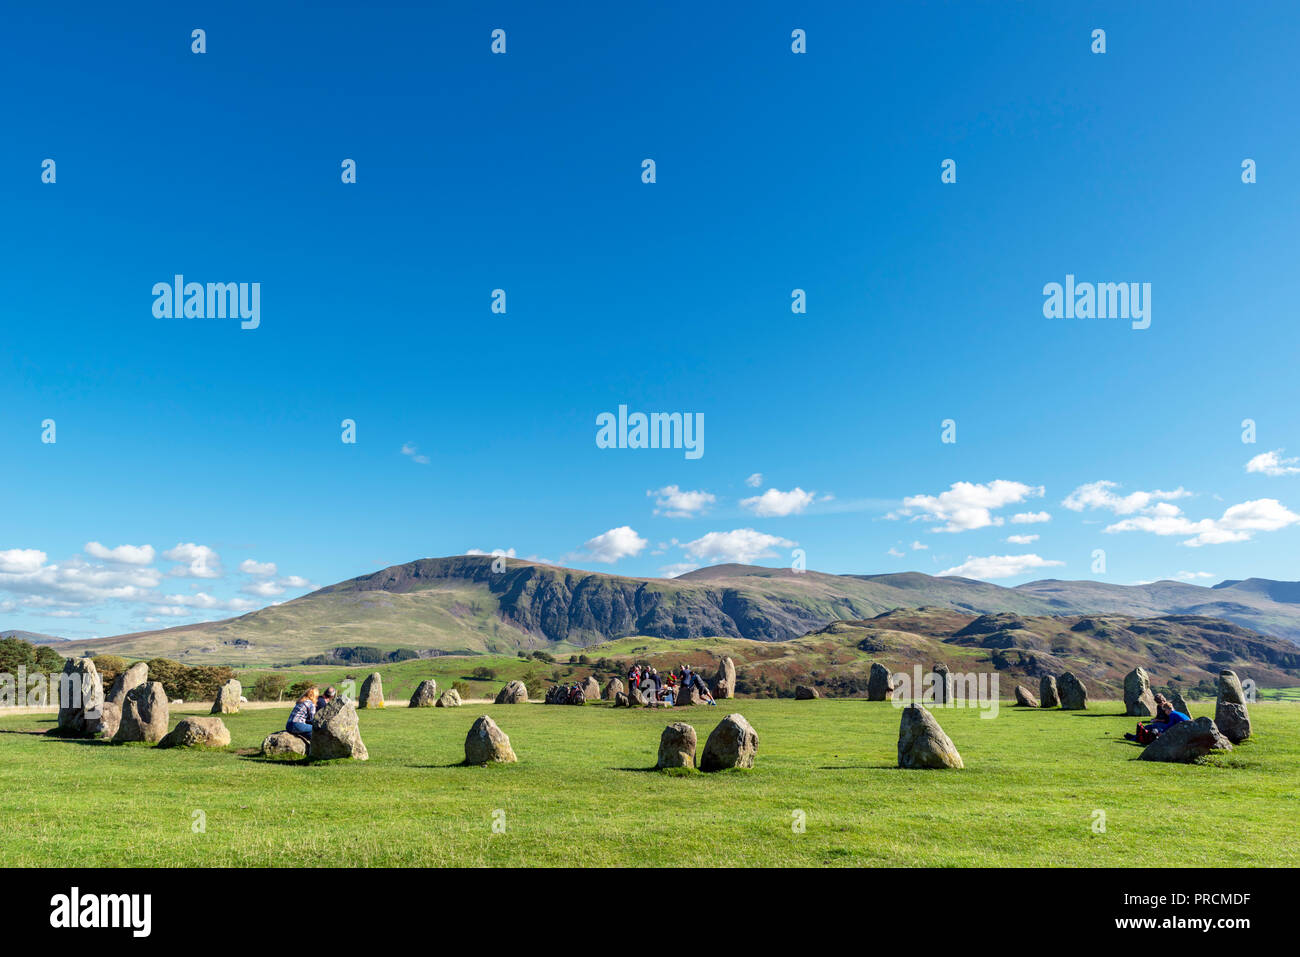 Visitors at Castlerigg Stone Circle, a late neolithic to early bronze age site near Keswick, Lake District, Cumbria, UK Stock Photo